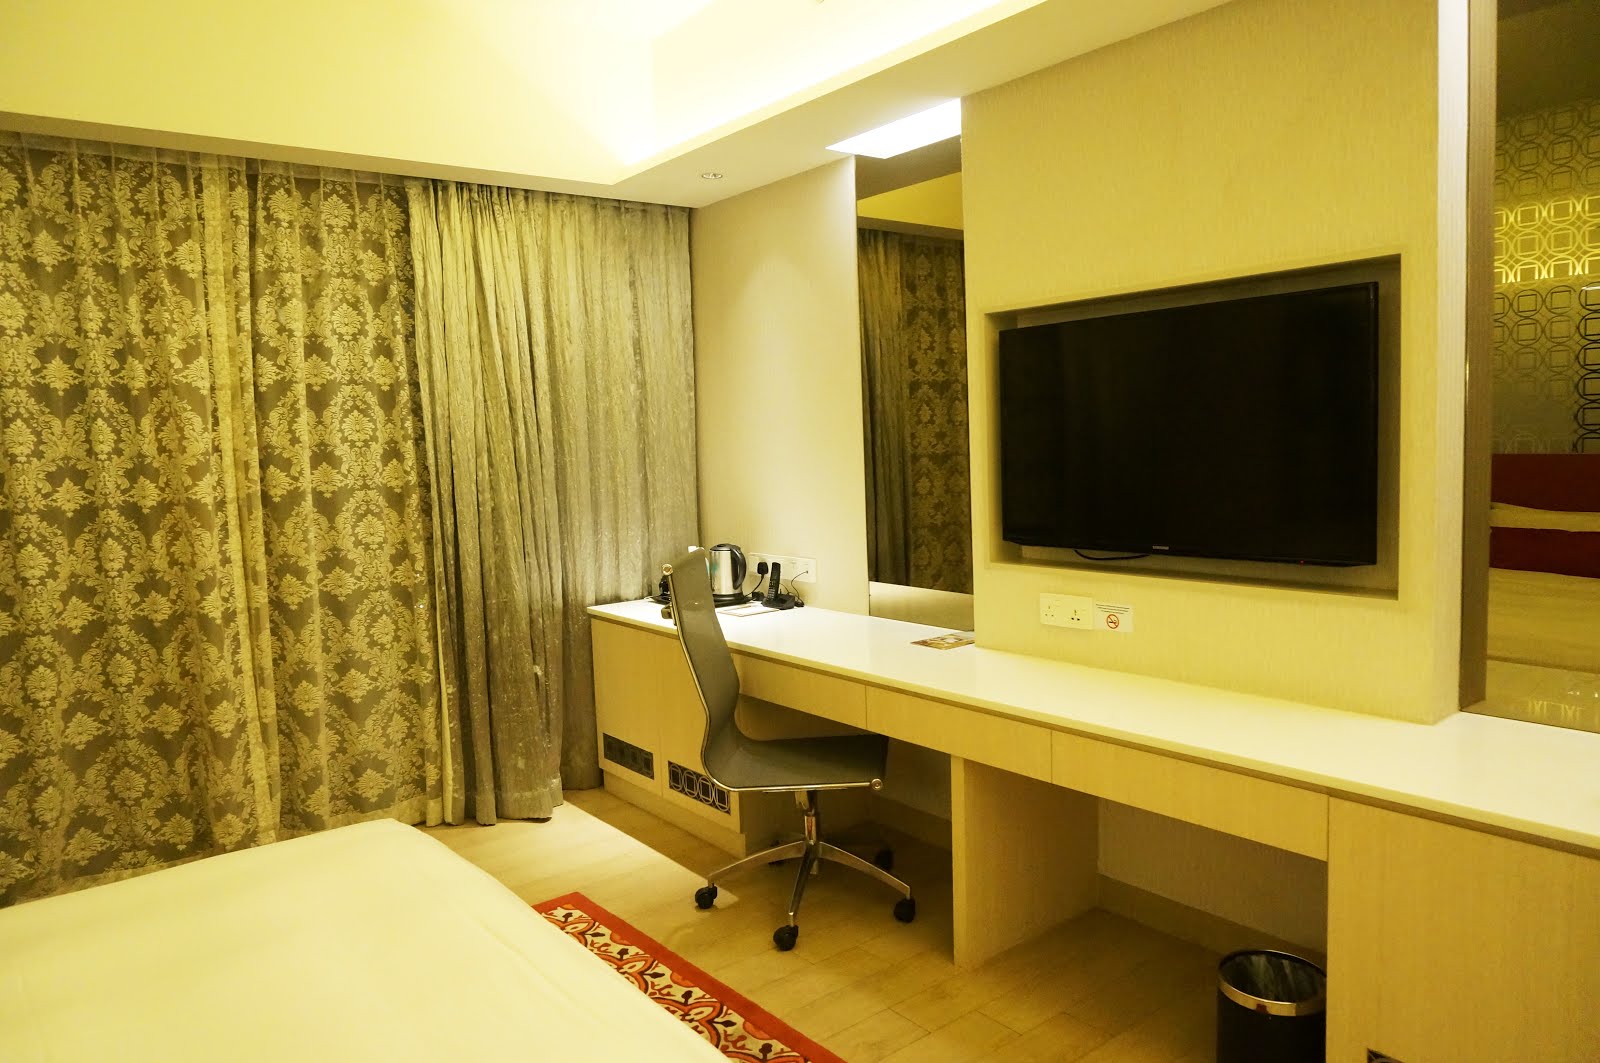 Village Hotel Katong Singapore Staycation Review pic